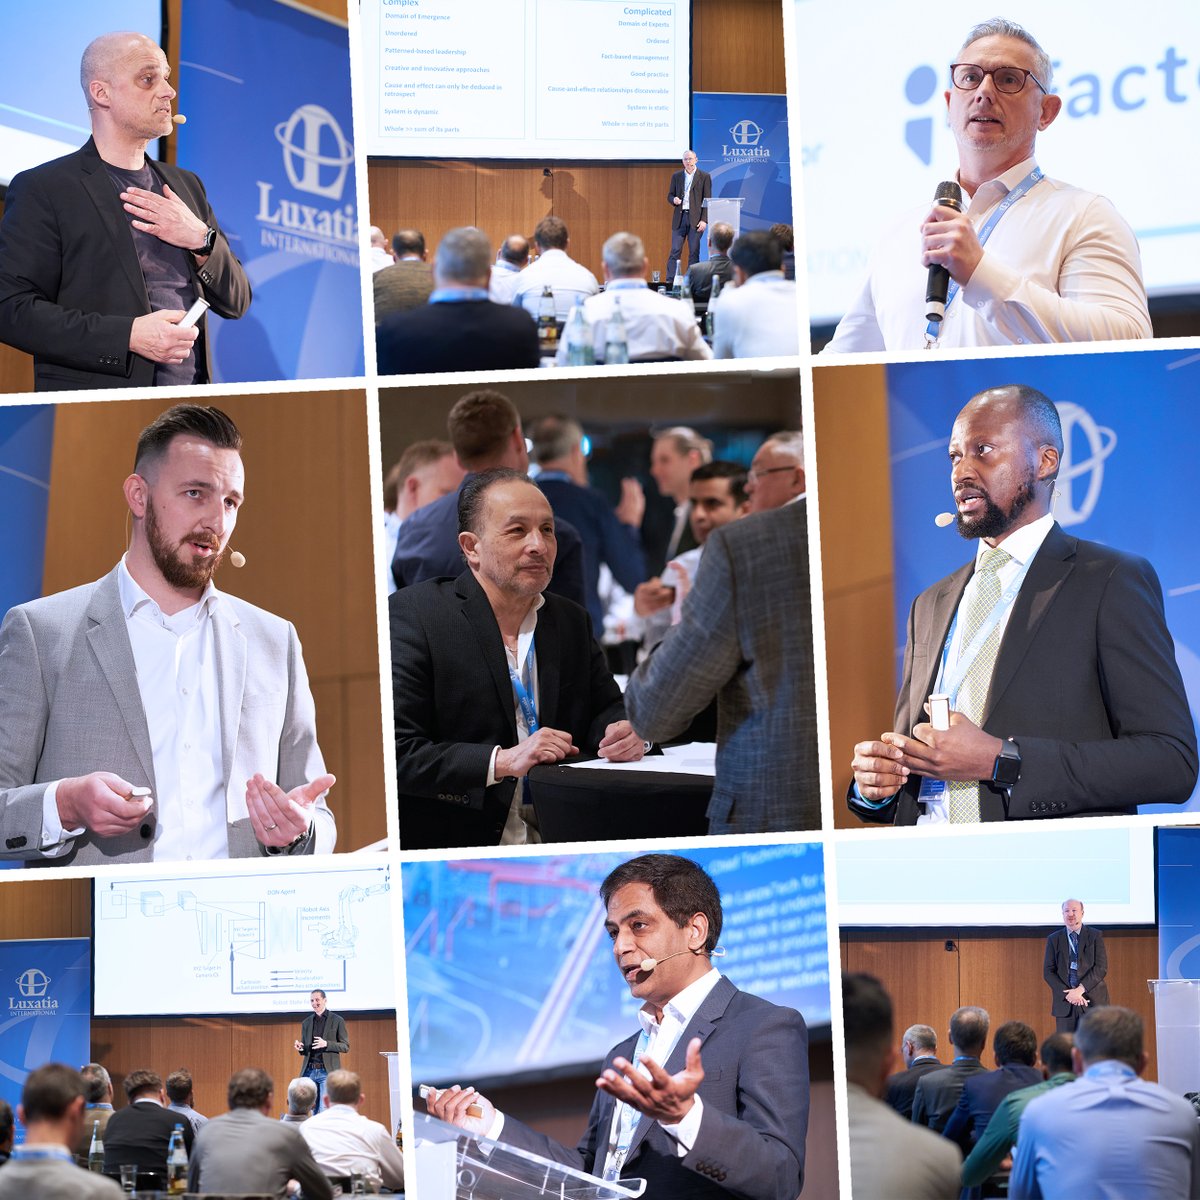 Industry leaders from @MSDInvents, @UniofExeter, @MTUaeroeng, @LanzaTech, @Bayer, @MTU_ie & @EYnews left us feeling inspired at the 9th Annual Smart Manufacturing Summit on how to strategically future-proof your manufacturing practices. #SmartManufacturing24 #ManufacturingAI